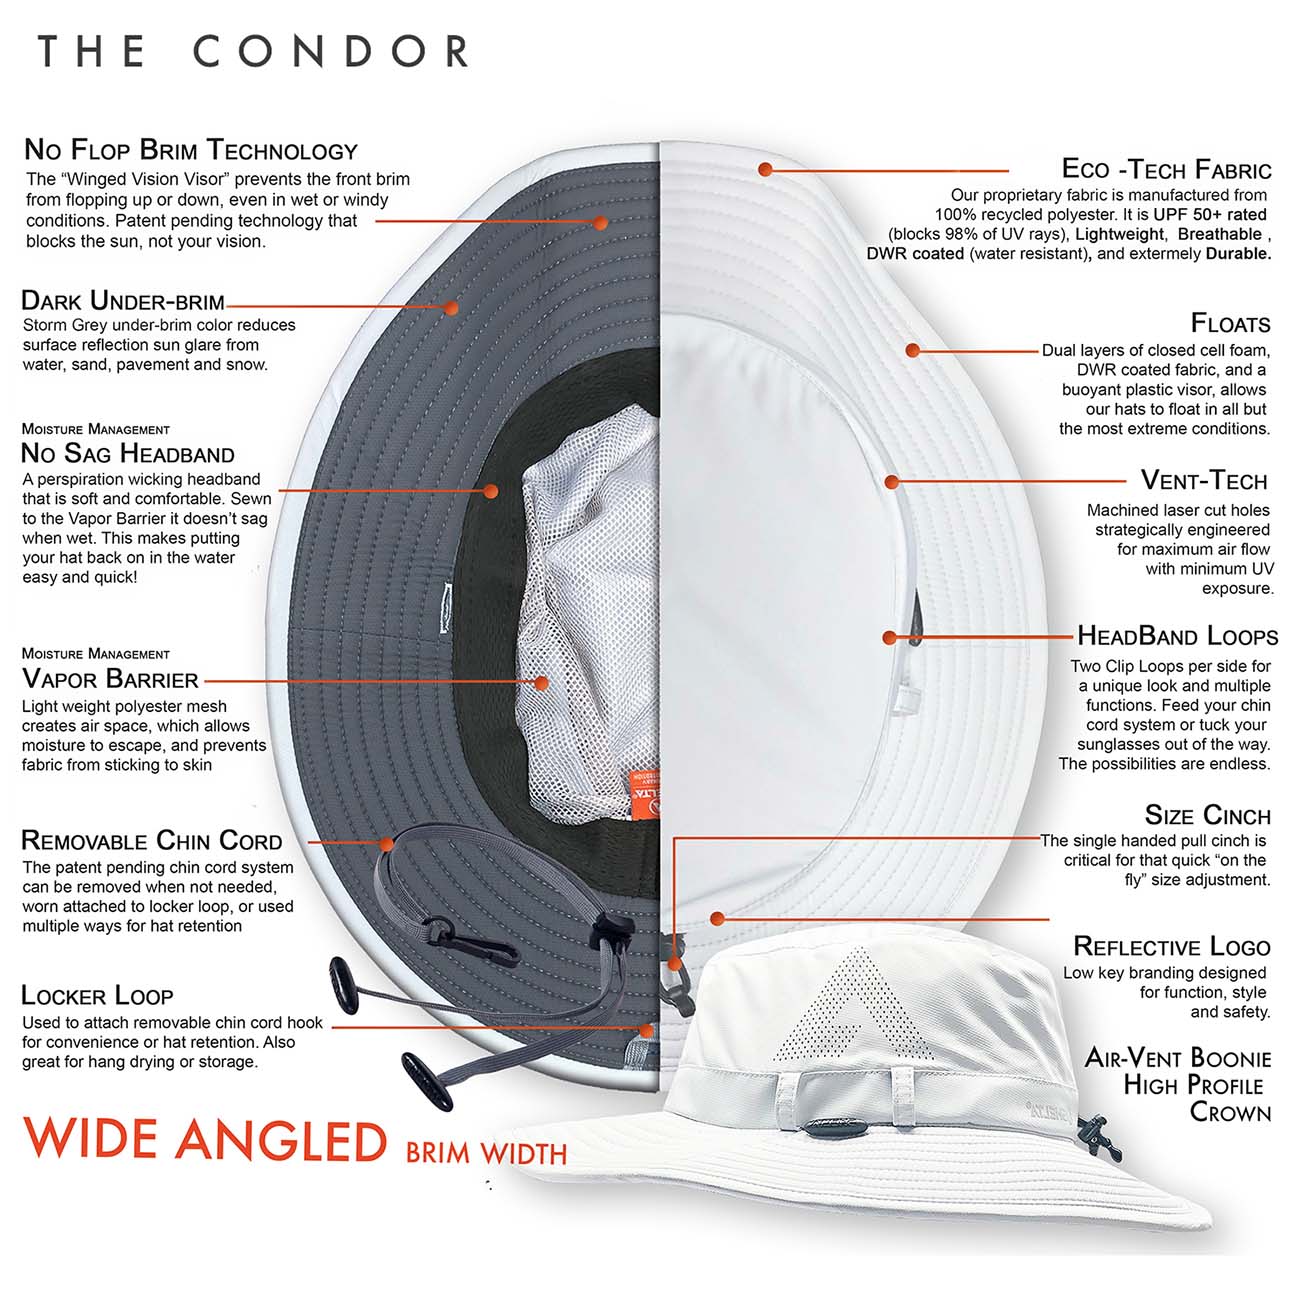 The Condor was created from feedback by our Shelta family who desired a sun hat style designed more for hot conditions and sun protection, than fitness related sports or activities. This more traditional looking style features a deeper crown for air flow and a wider downward angled brim for more UV protection.  A full vapor barrier liner keeps the fabric off of your scalp and allows air to flow through the laser cut venting holes and breathable fabric. Still amphibious, the No Sag headband, No Flop brim technology and the fact it floats, makes the Condor water safe.  Perfect for cruising on the boat, digging in the garden, or just walking on the beach. We did not include a pocket on the Condor, this was done to make the hat lighter